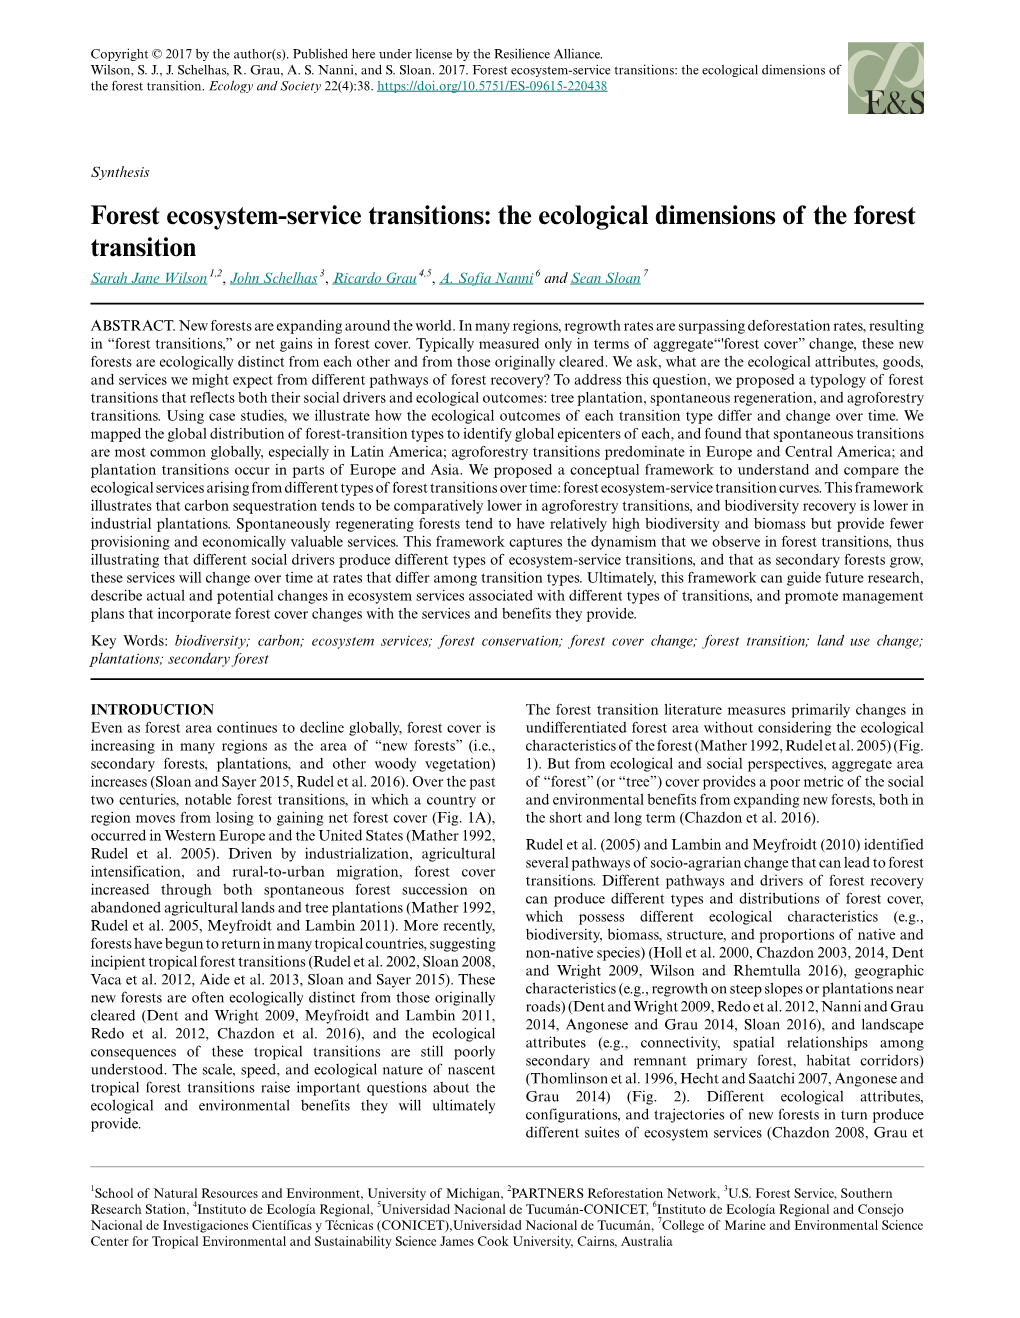 Forest Ecosystem-Service Transitions: the Ecological Dimensions of the Forest Transition